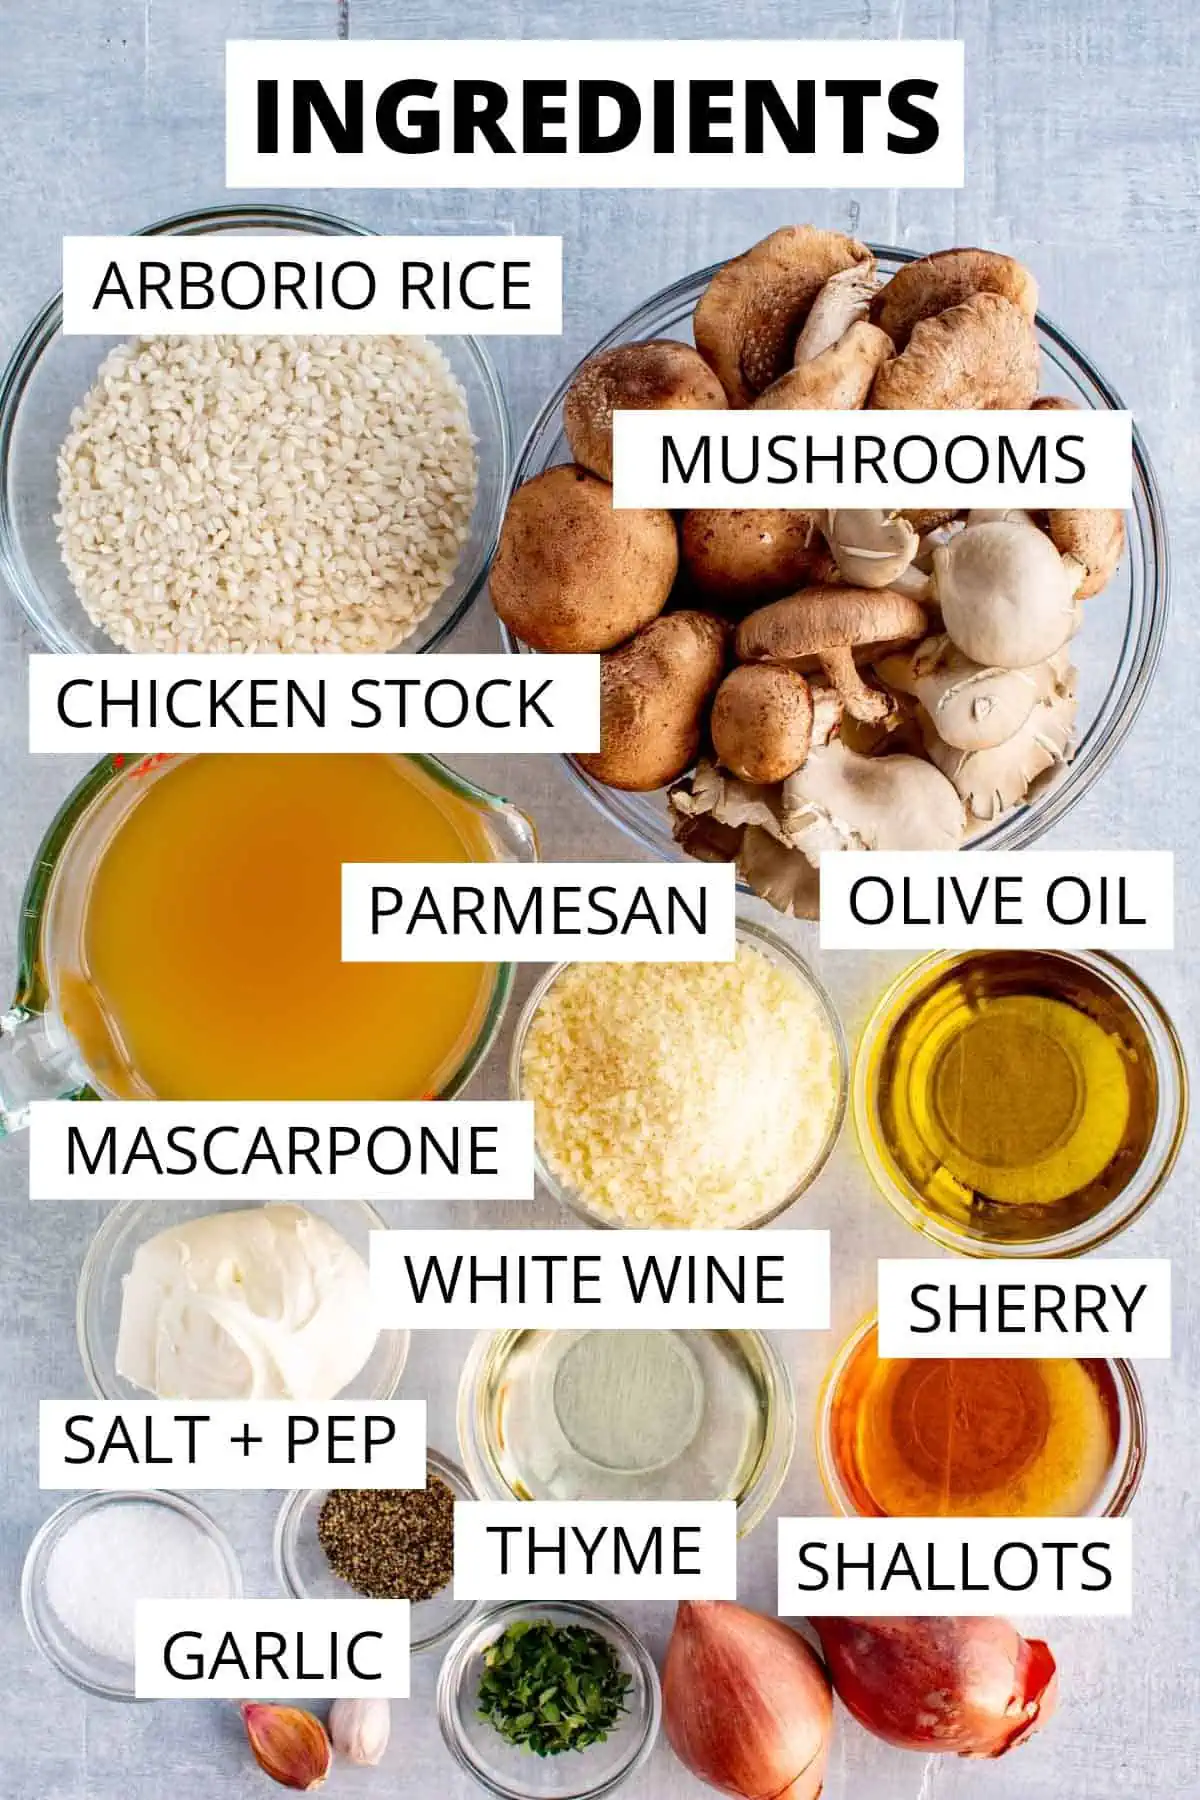 Ingredients for mushroom risotto: arborio rice, mushrooms, chicken stock, parmesan, olive oil, mascarpone, white wine, sherry, salt and pepper, thyme, shallots, and garlic. 